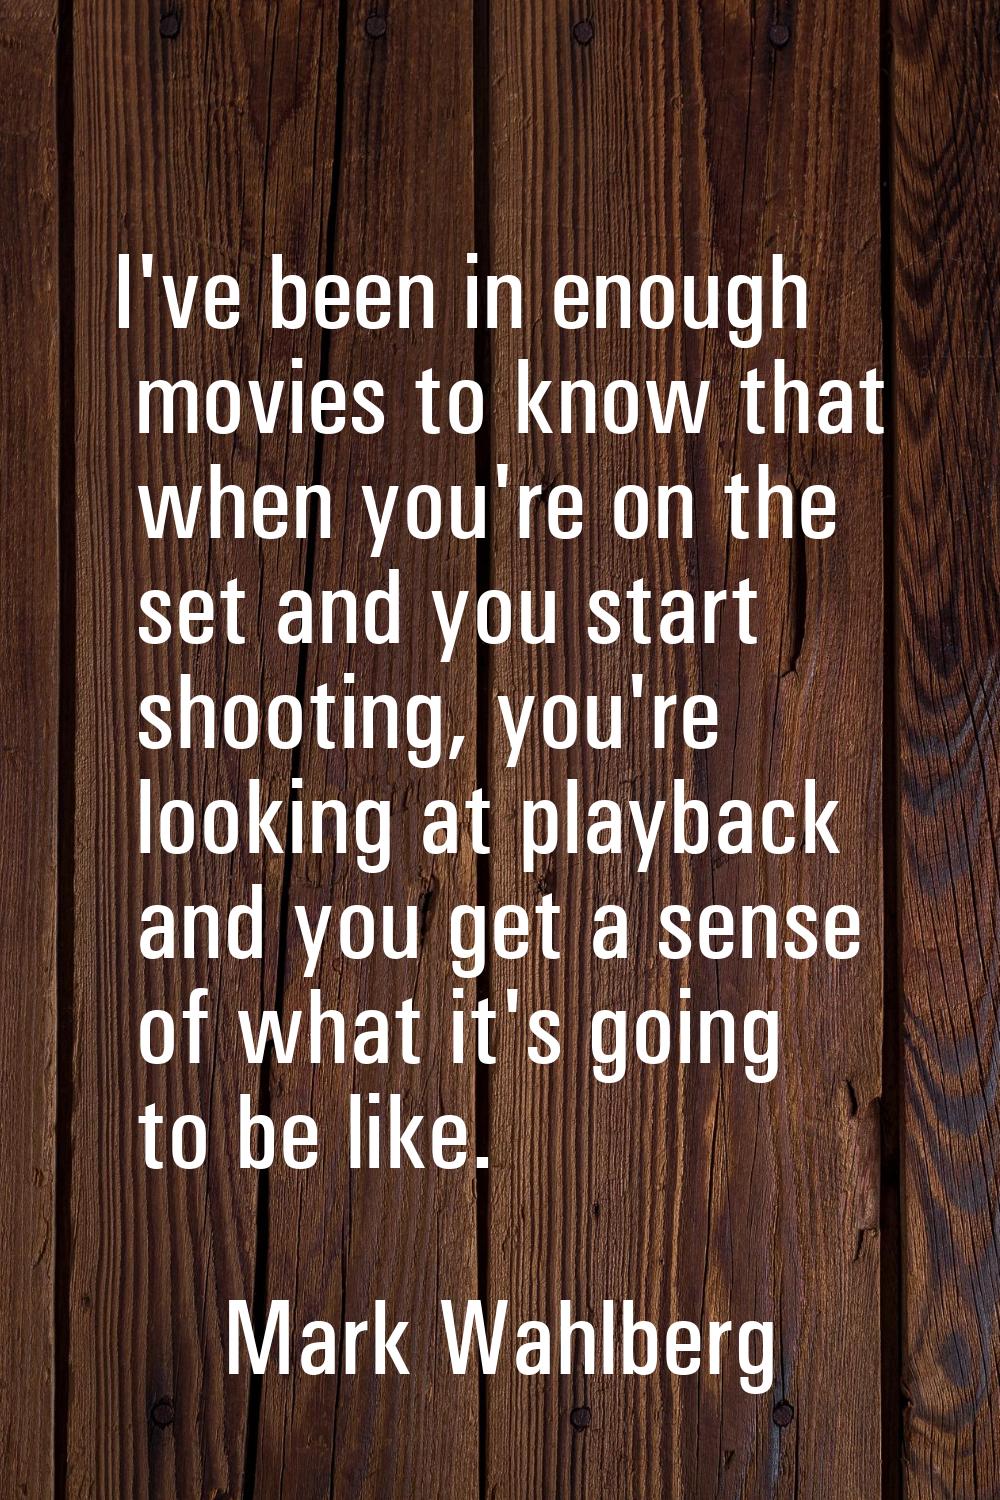 I've been in enough movies to know that when you're on the set and you start shooting, you're looki